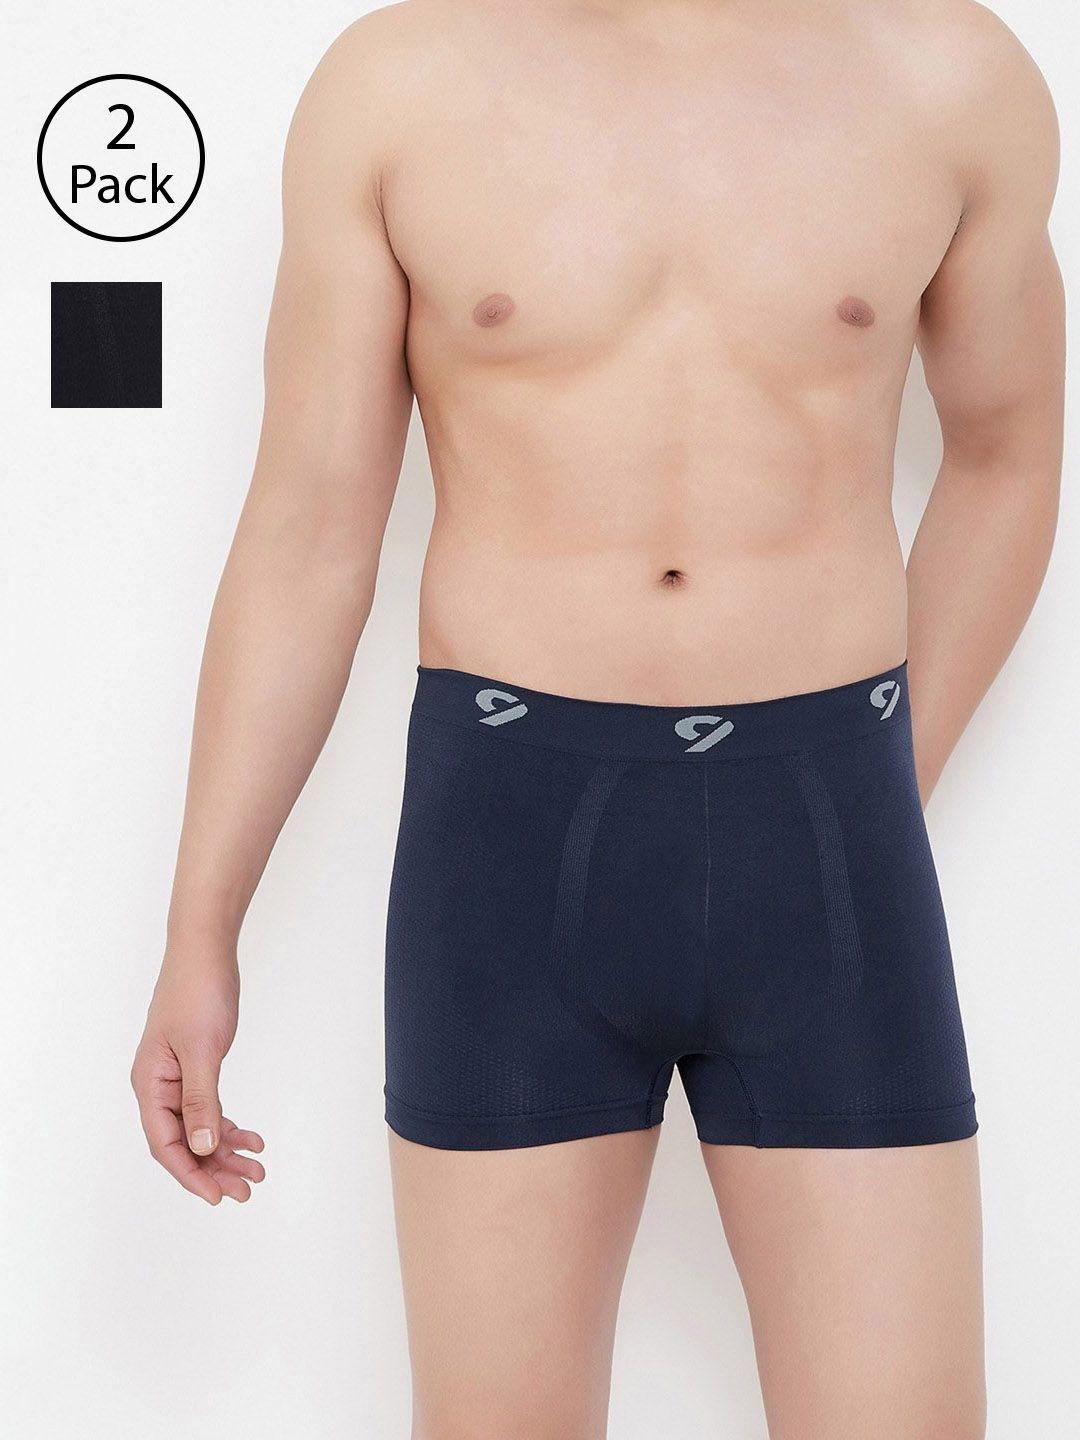 c9 airwear men pack of 2 solid seamless trunks p601navy_p602blk